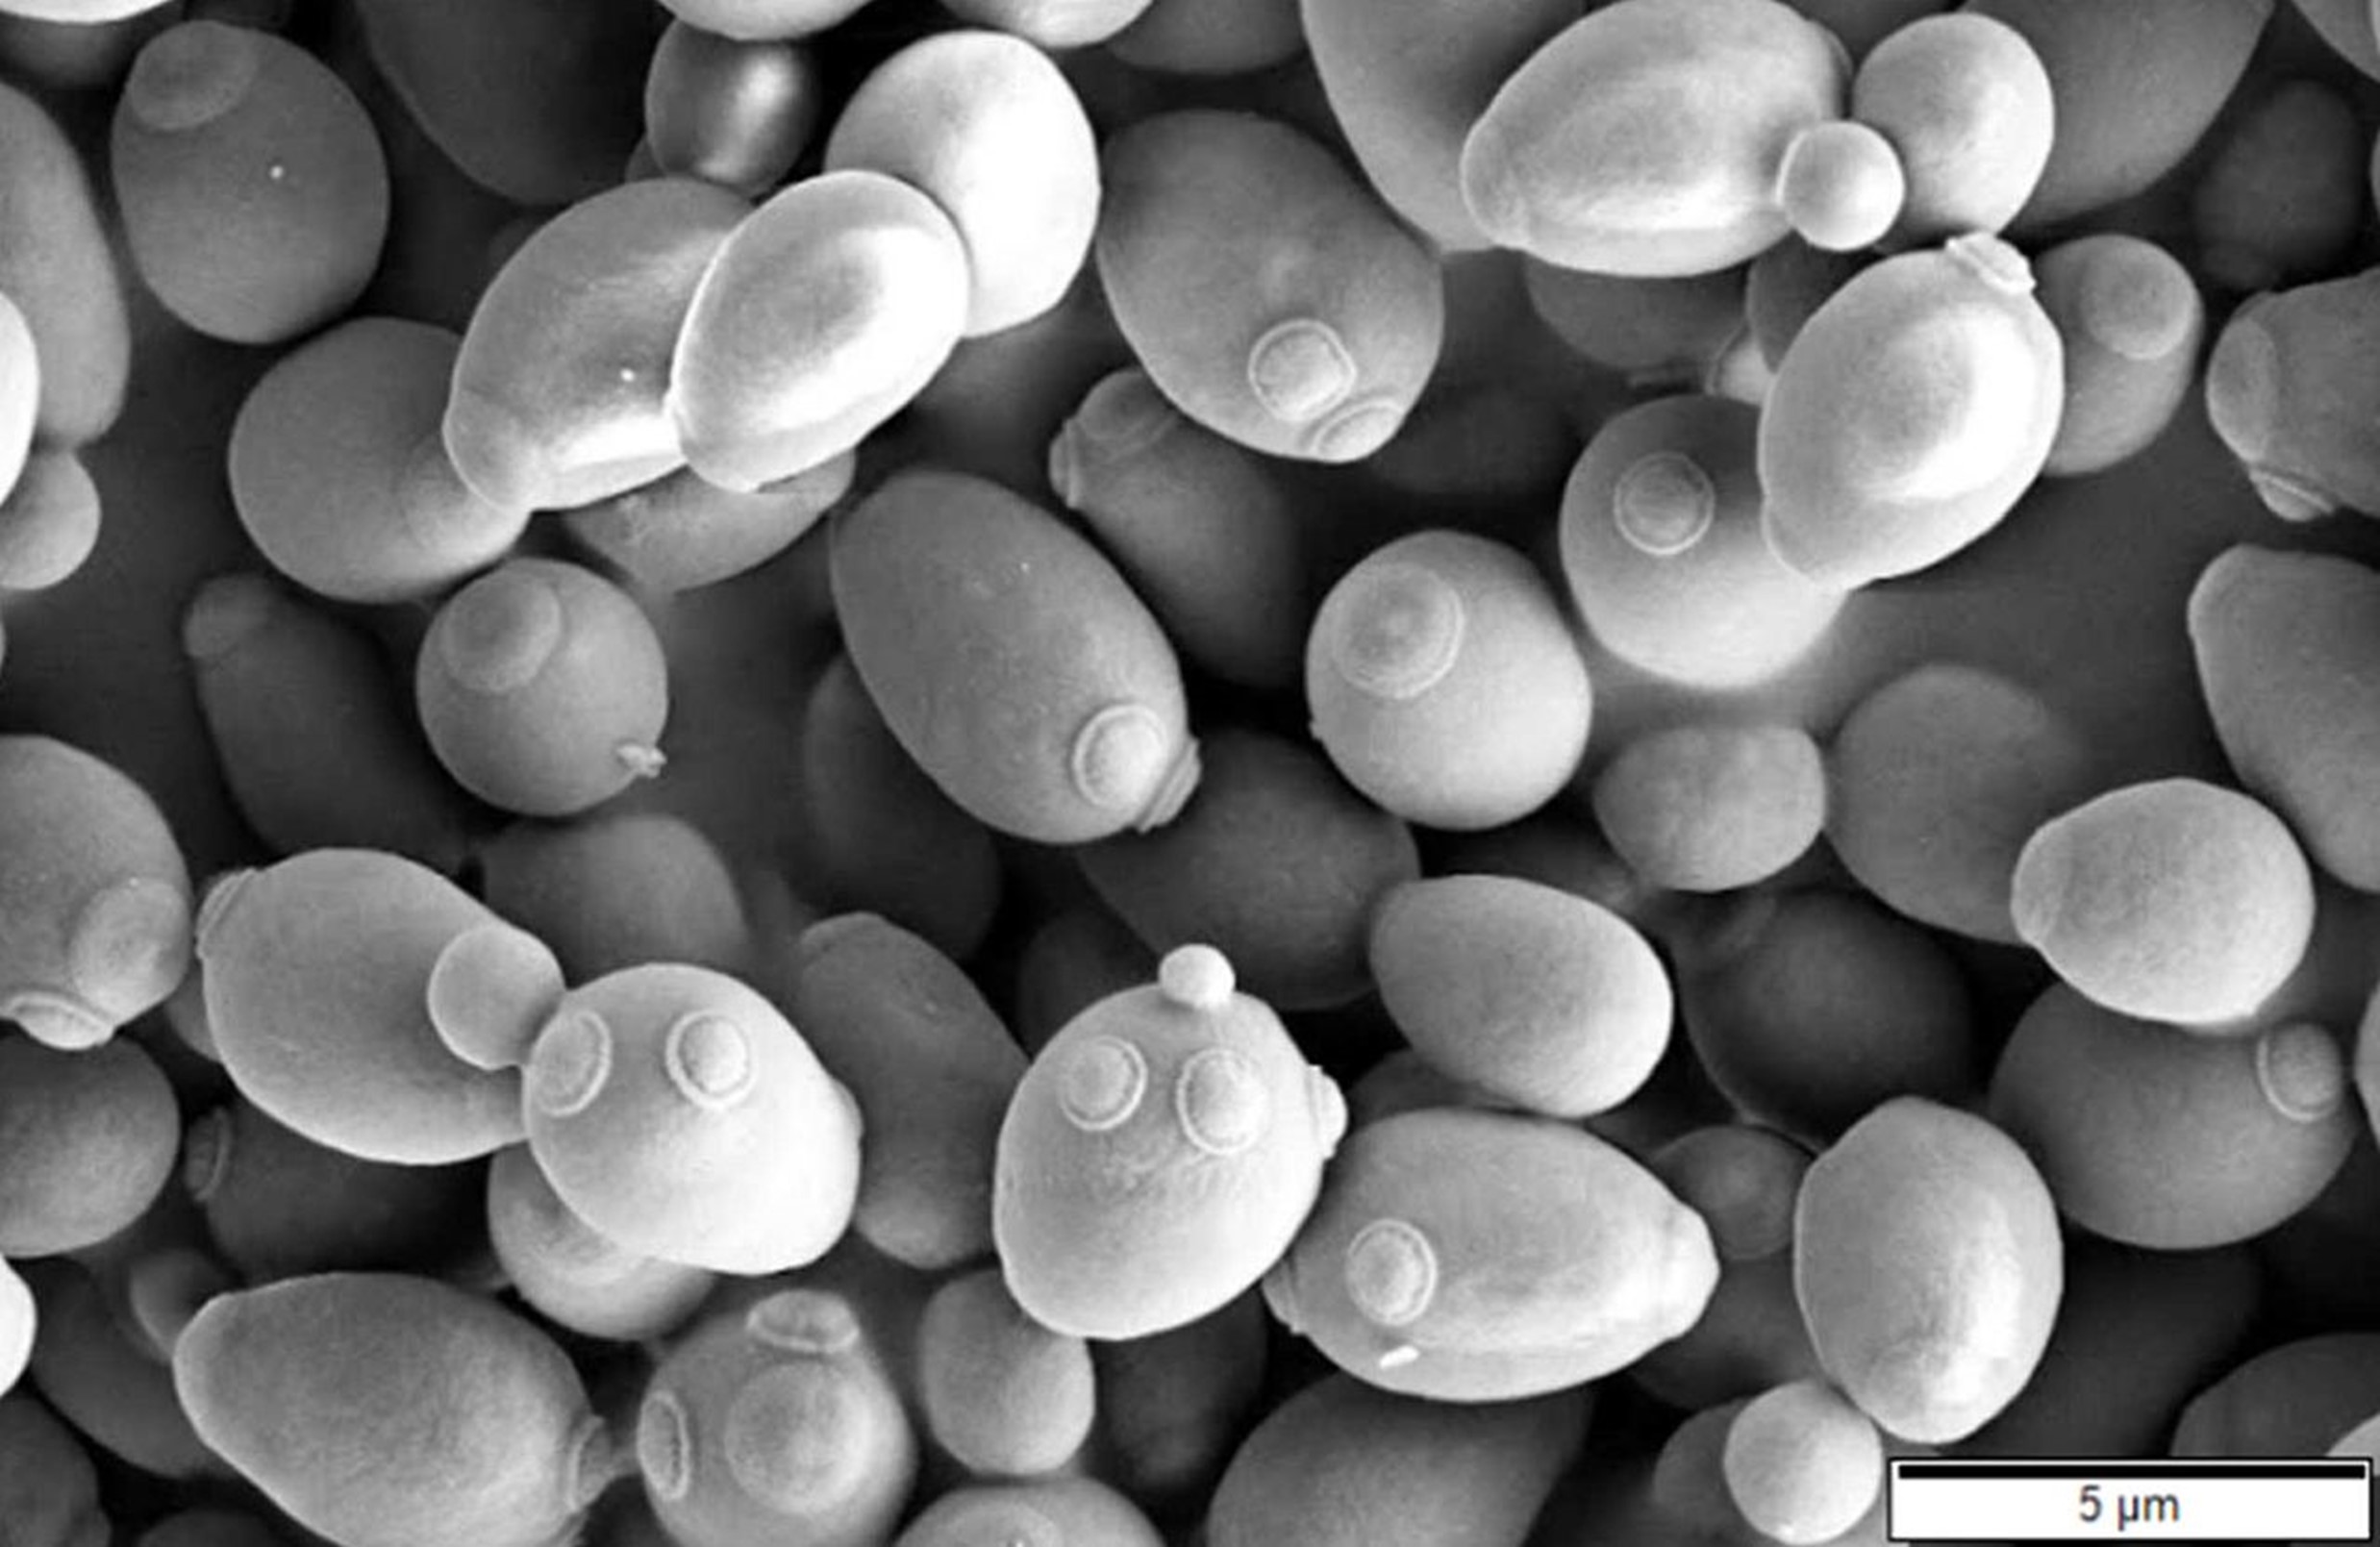 A single-celled yeast budding